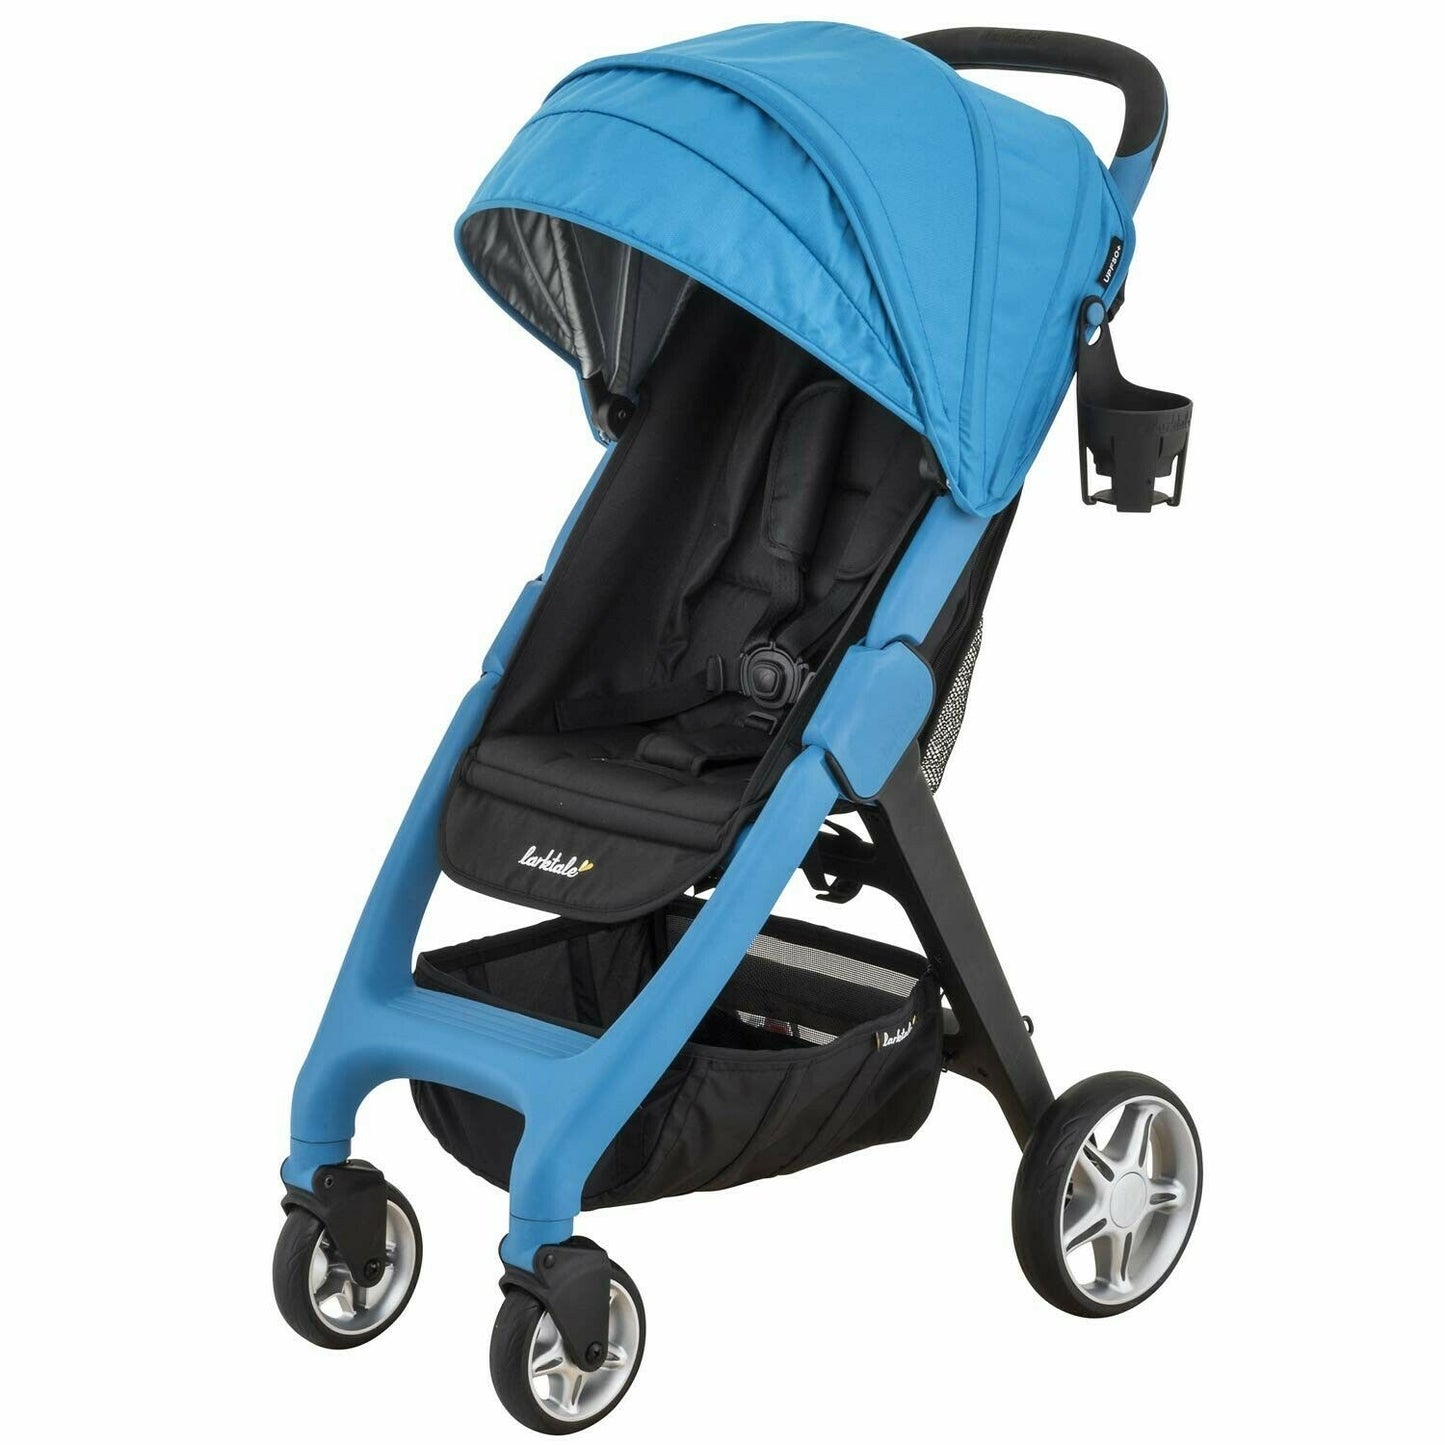 Infant Baby Stroller Newborn Light Weight Travel Compact Fold Buggy